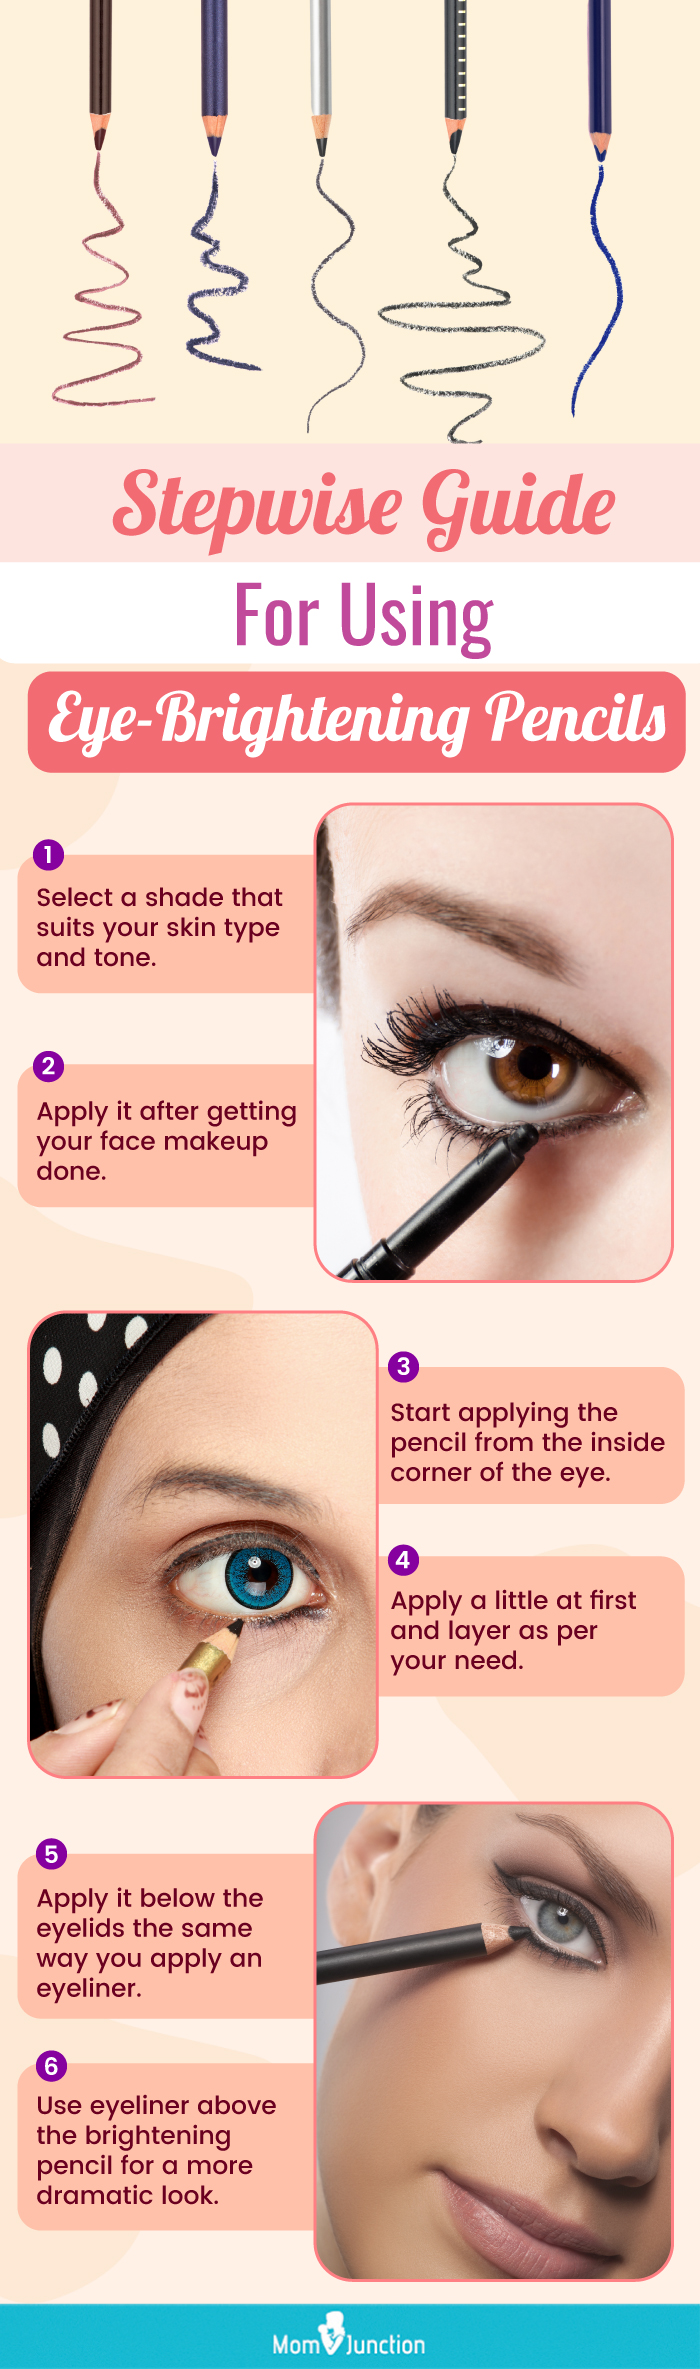 Stepwise Guide For The Application Of Eye Brightening Pencils (infographic)